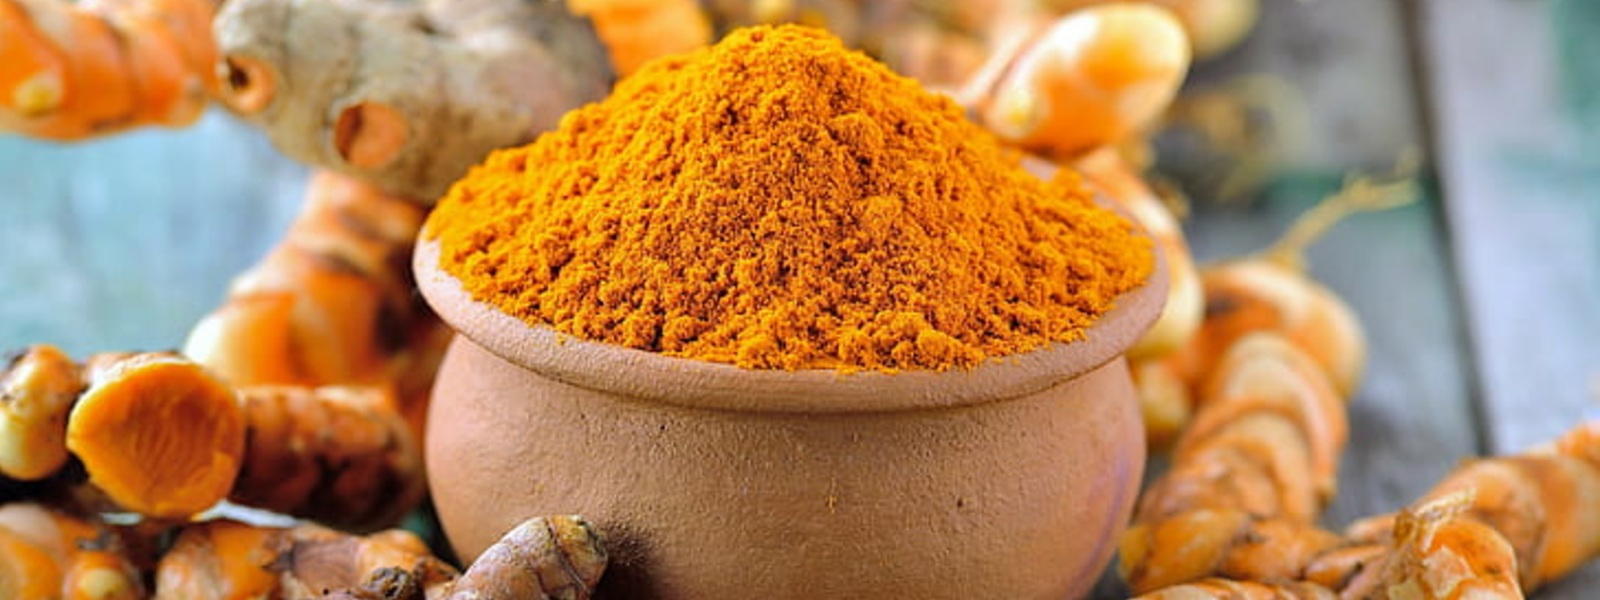 6.4 metric tonnes of illegally imported turmeric seized